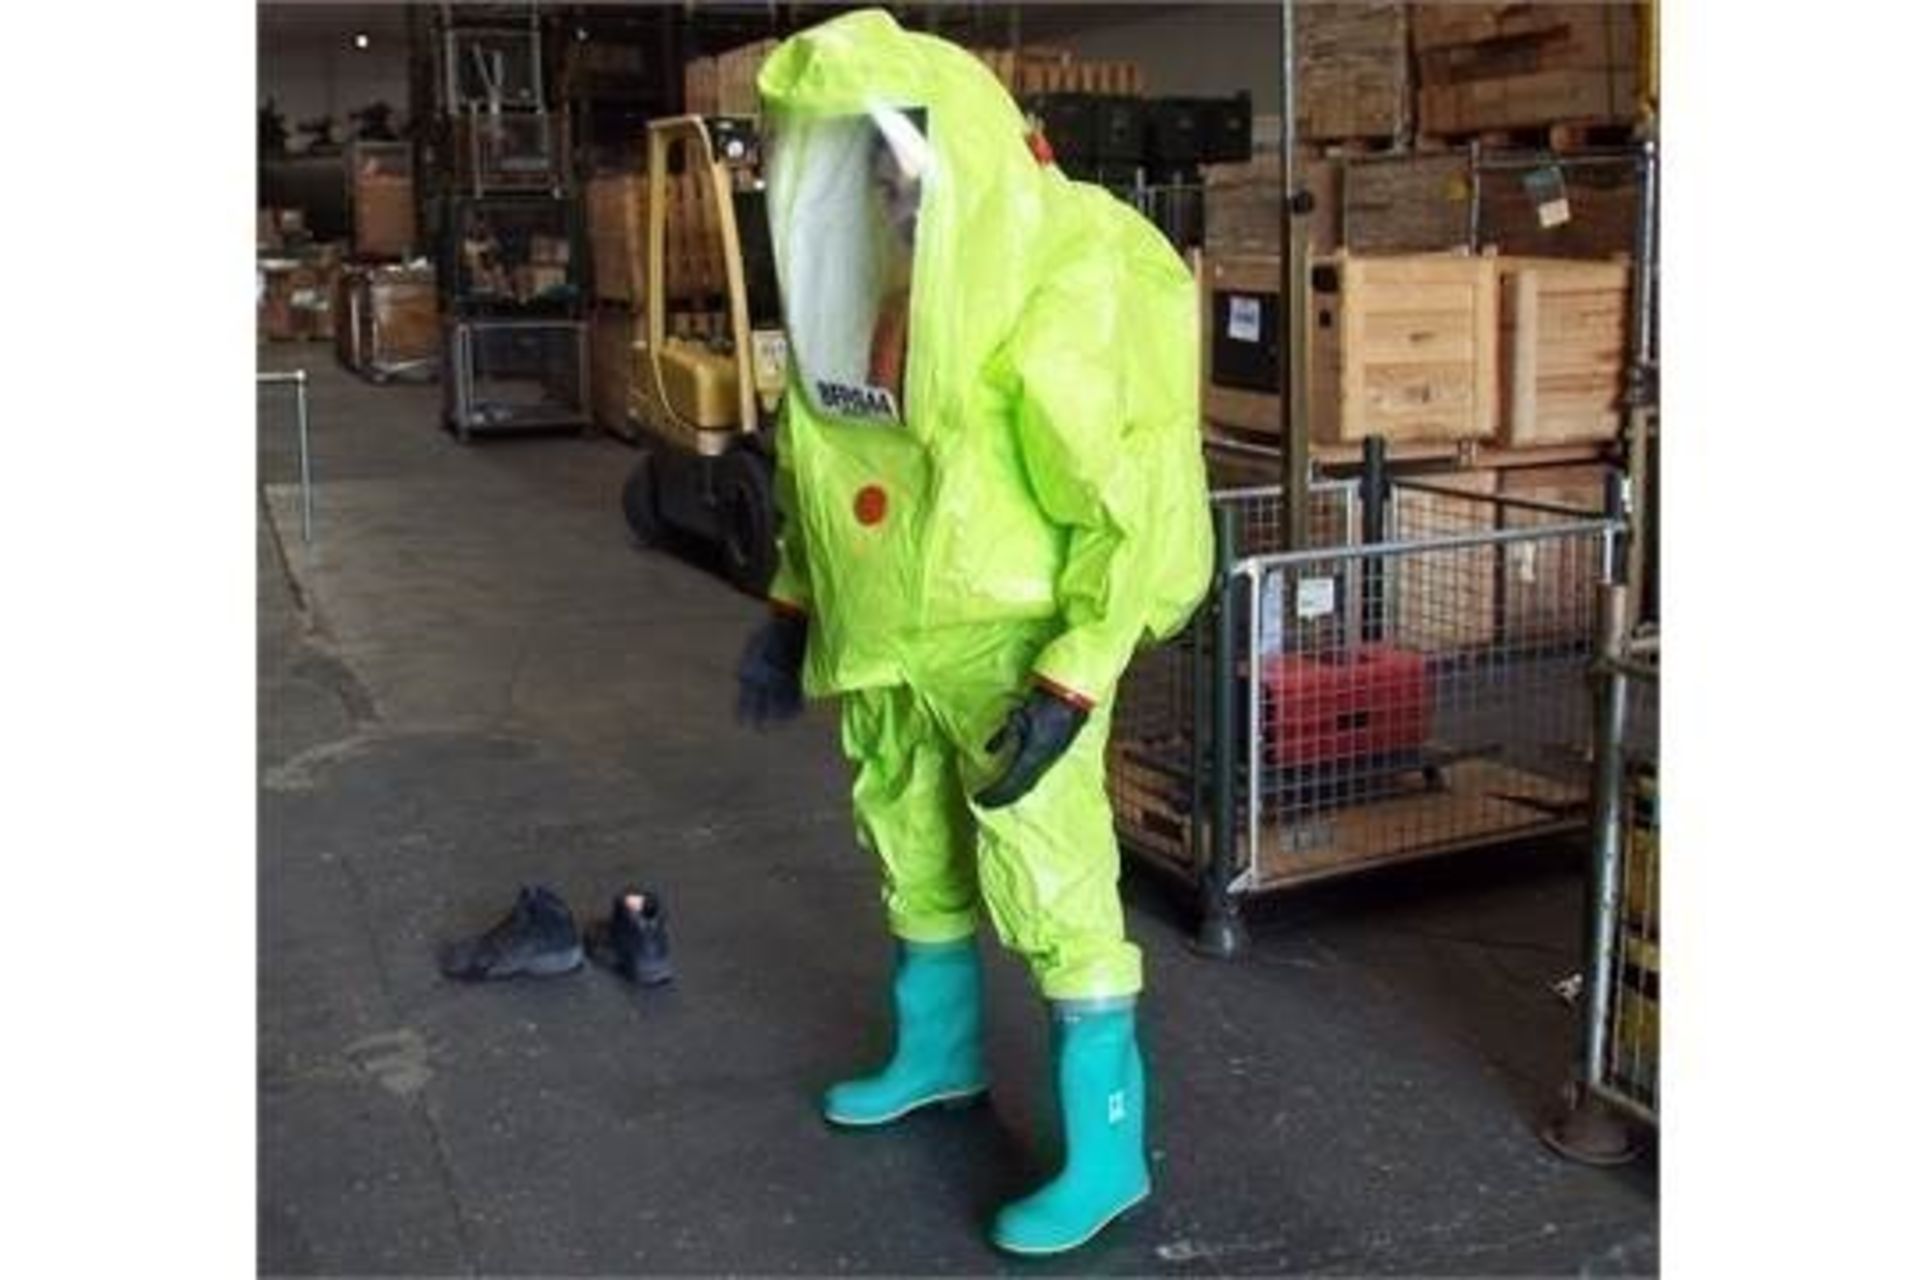 1 x Unissued Respirex Tychem TK Gas-Tight Hazmat Suit Type 1A with Attached Boots and Gloves. Medium - Image 3 of 8